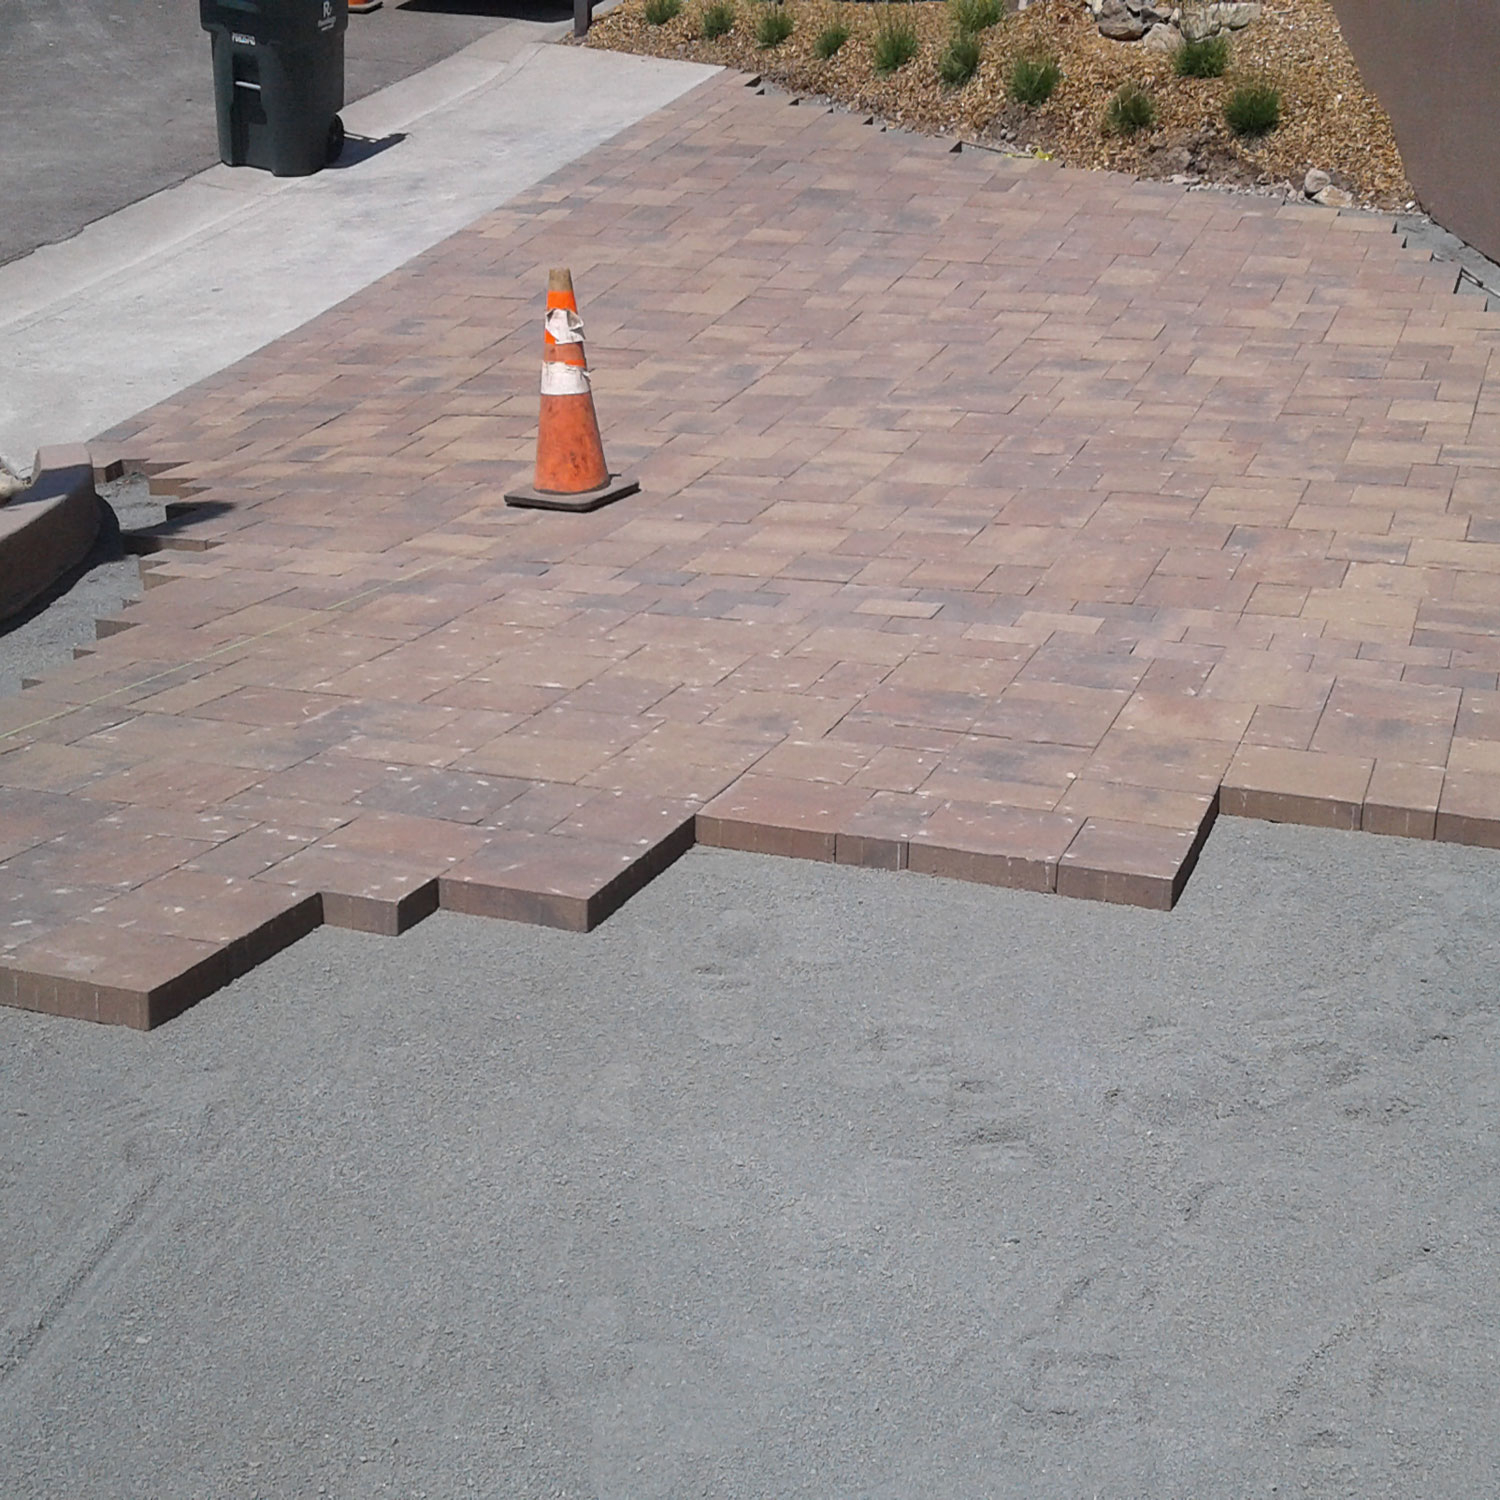 Stone pavers being installed on steep driveway upgrade project.